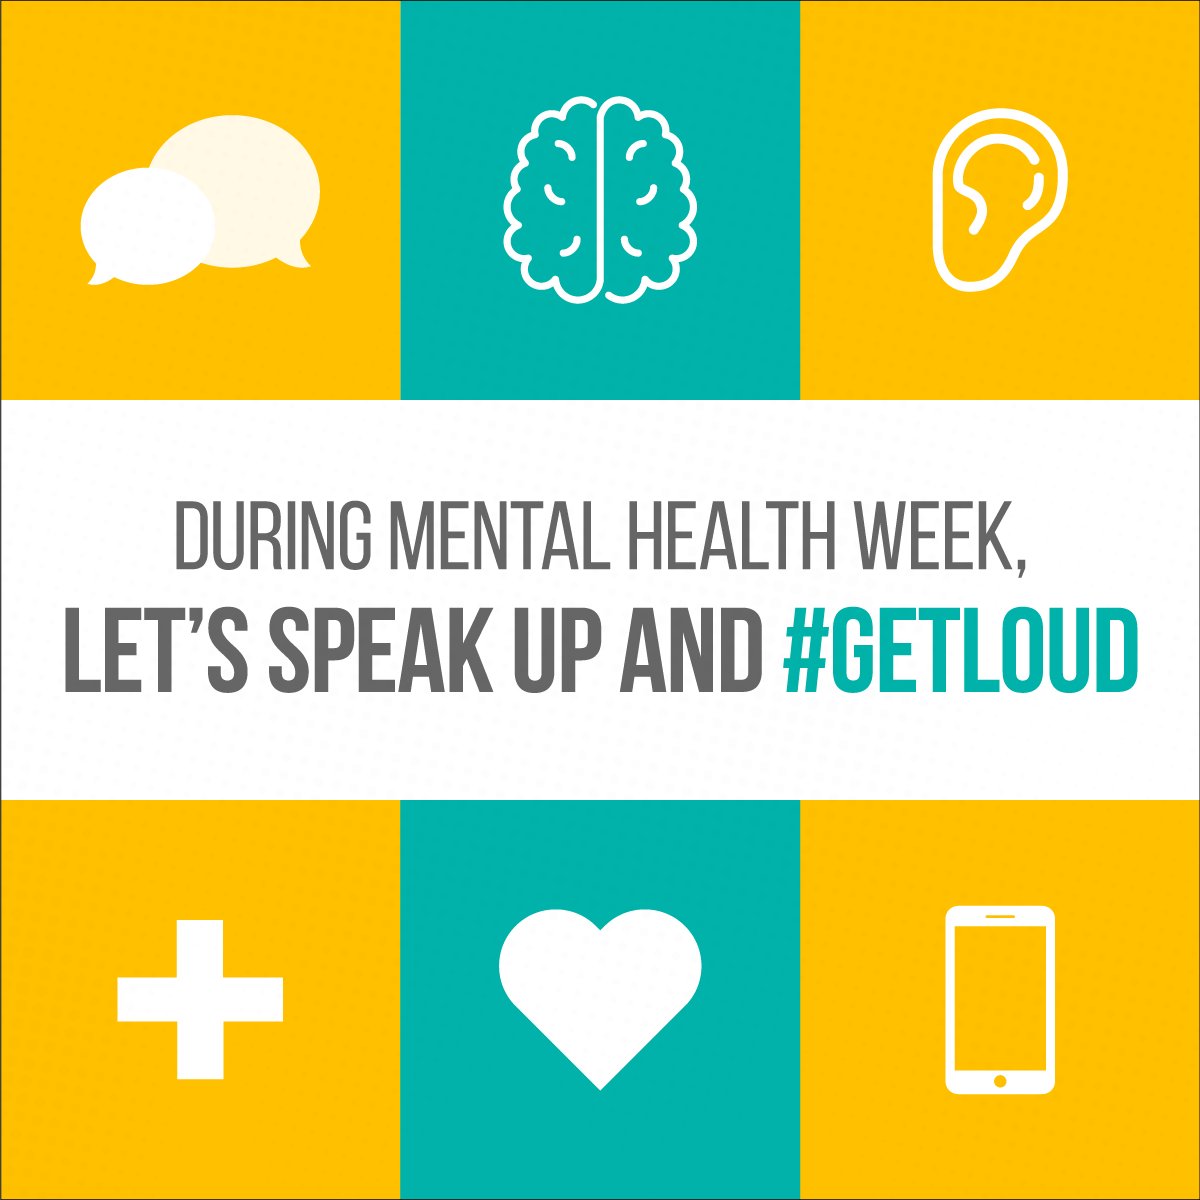 Everyone knows I already #GetLoud for #MentalHealth, but let this #MentalHealthWeek allow for all to #GetLoud and know it's #OkayToNotBeOkay